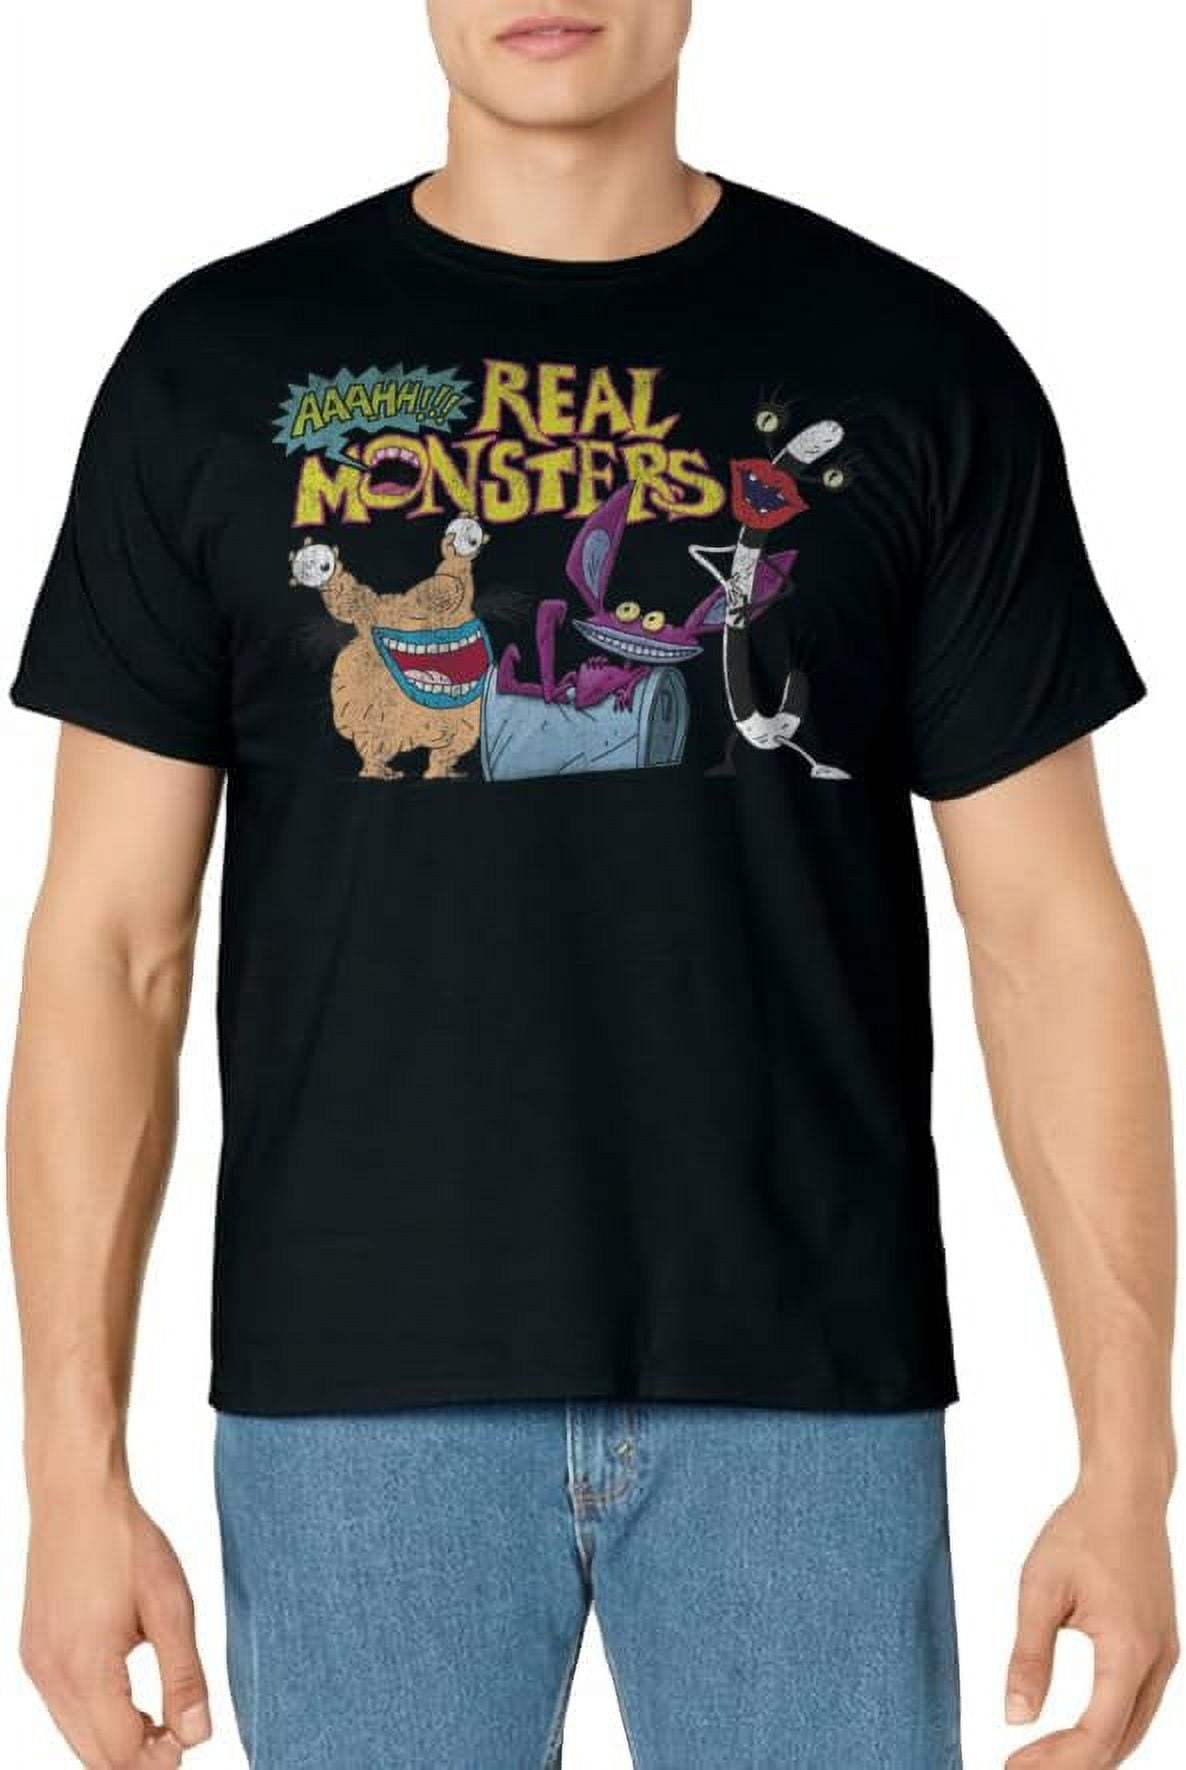 Aaahh!!! Real Monsters Friends Logo T-Shirt graphic Cartoon Anime Fans ...